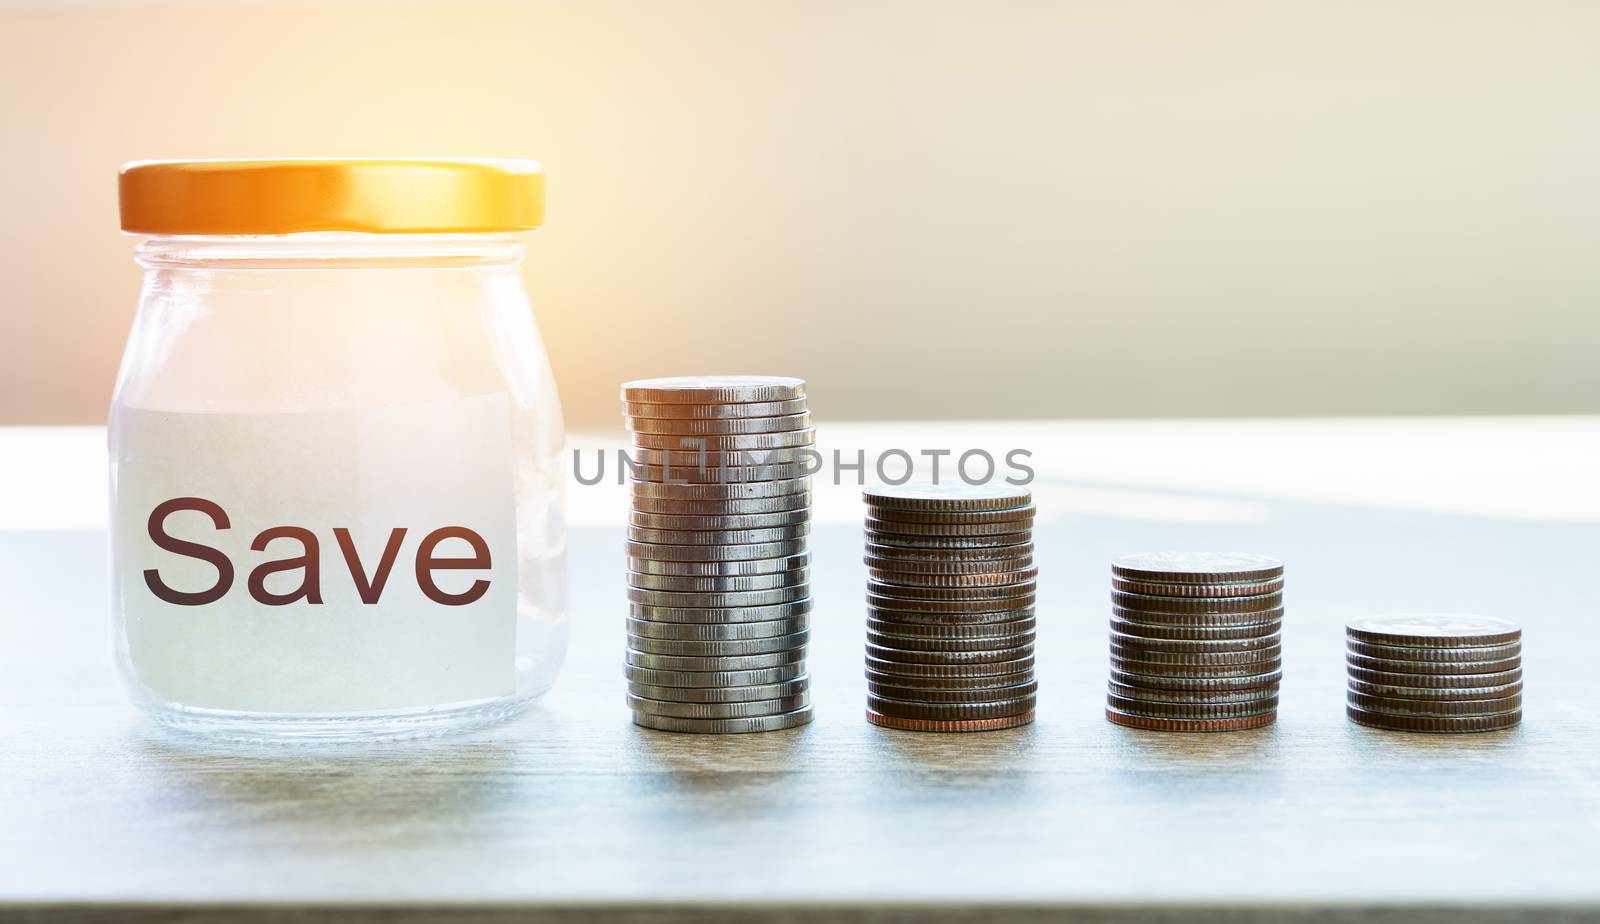 Money savings concepts. Put coins in glass bottles with paper label and text to spend on expenses such as savings, tourism, investment, emergency, retirement on wooden table with blur background